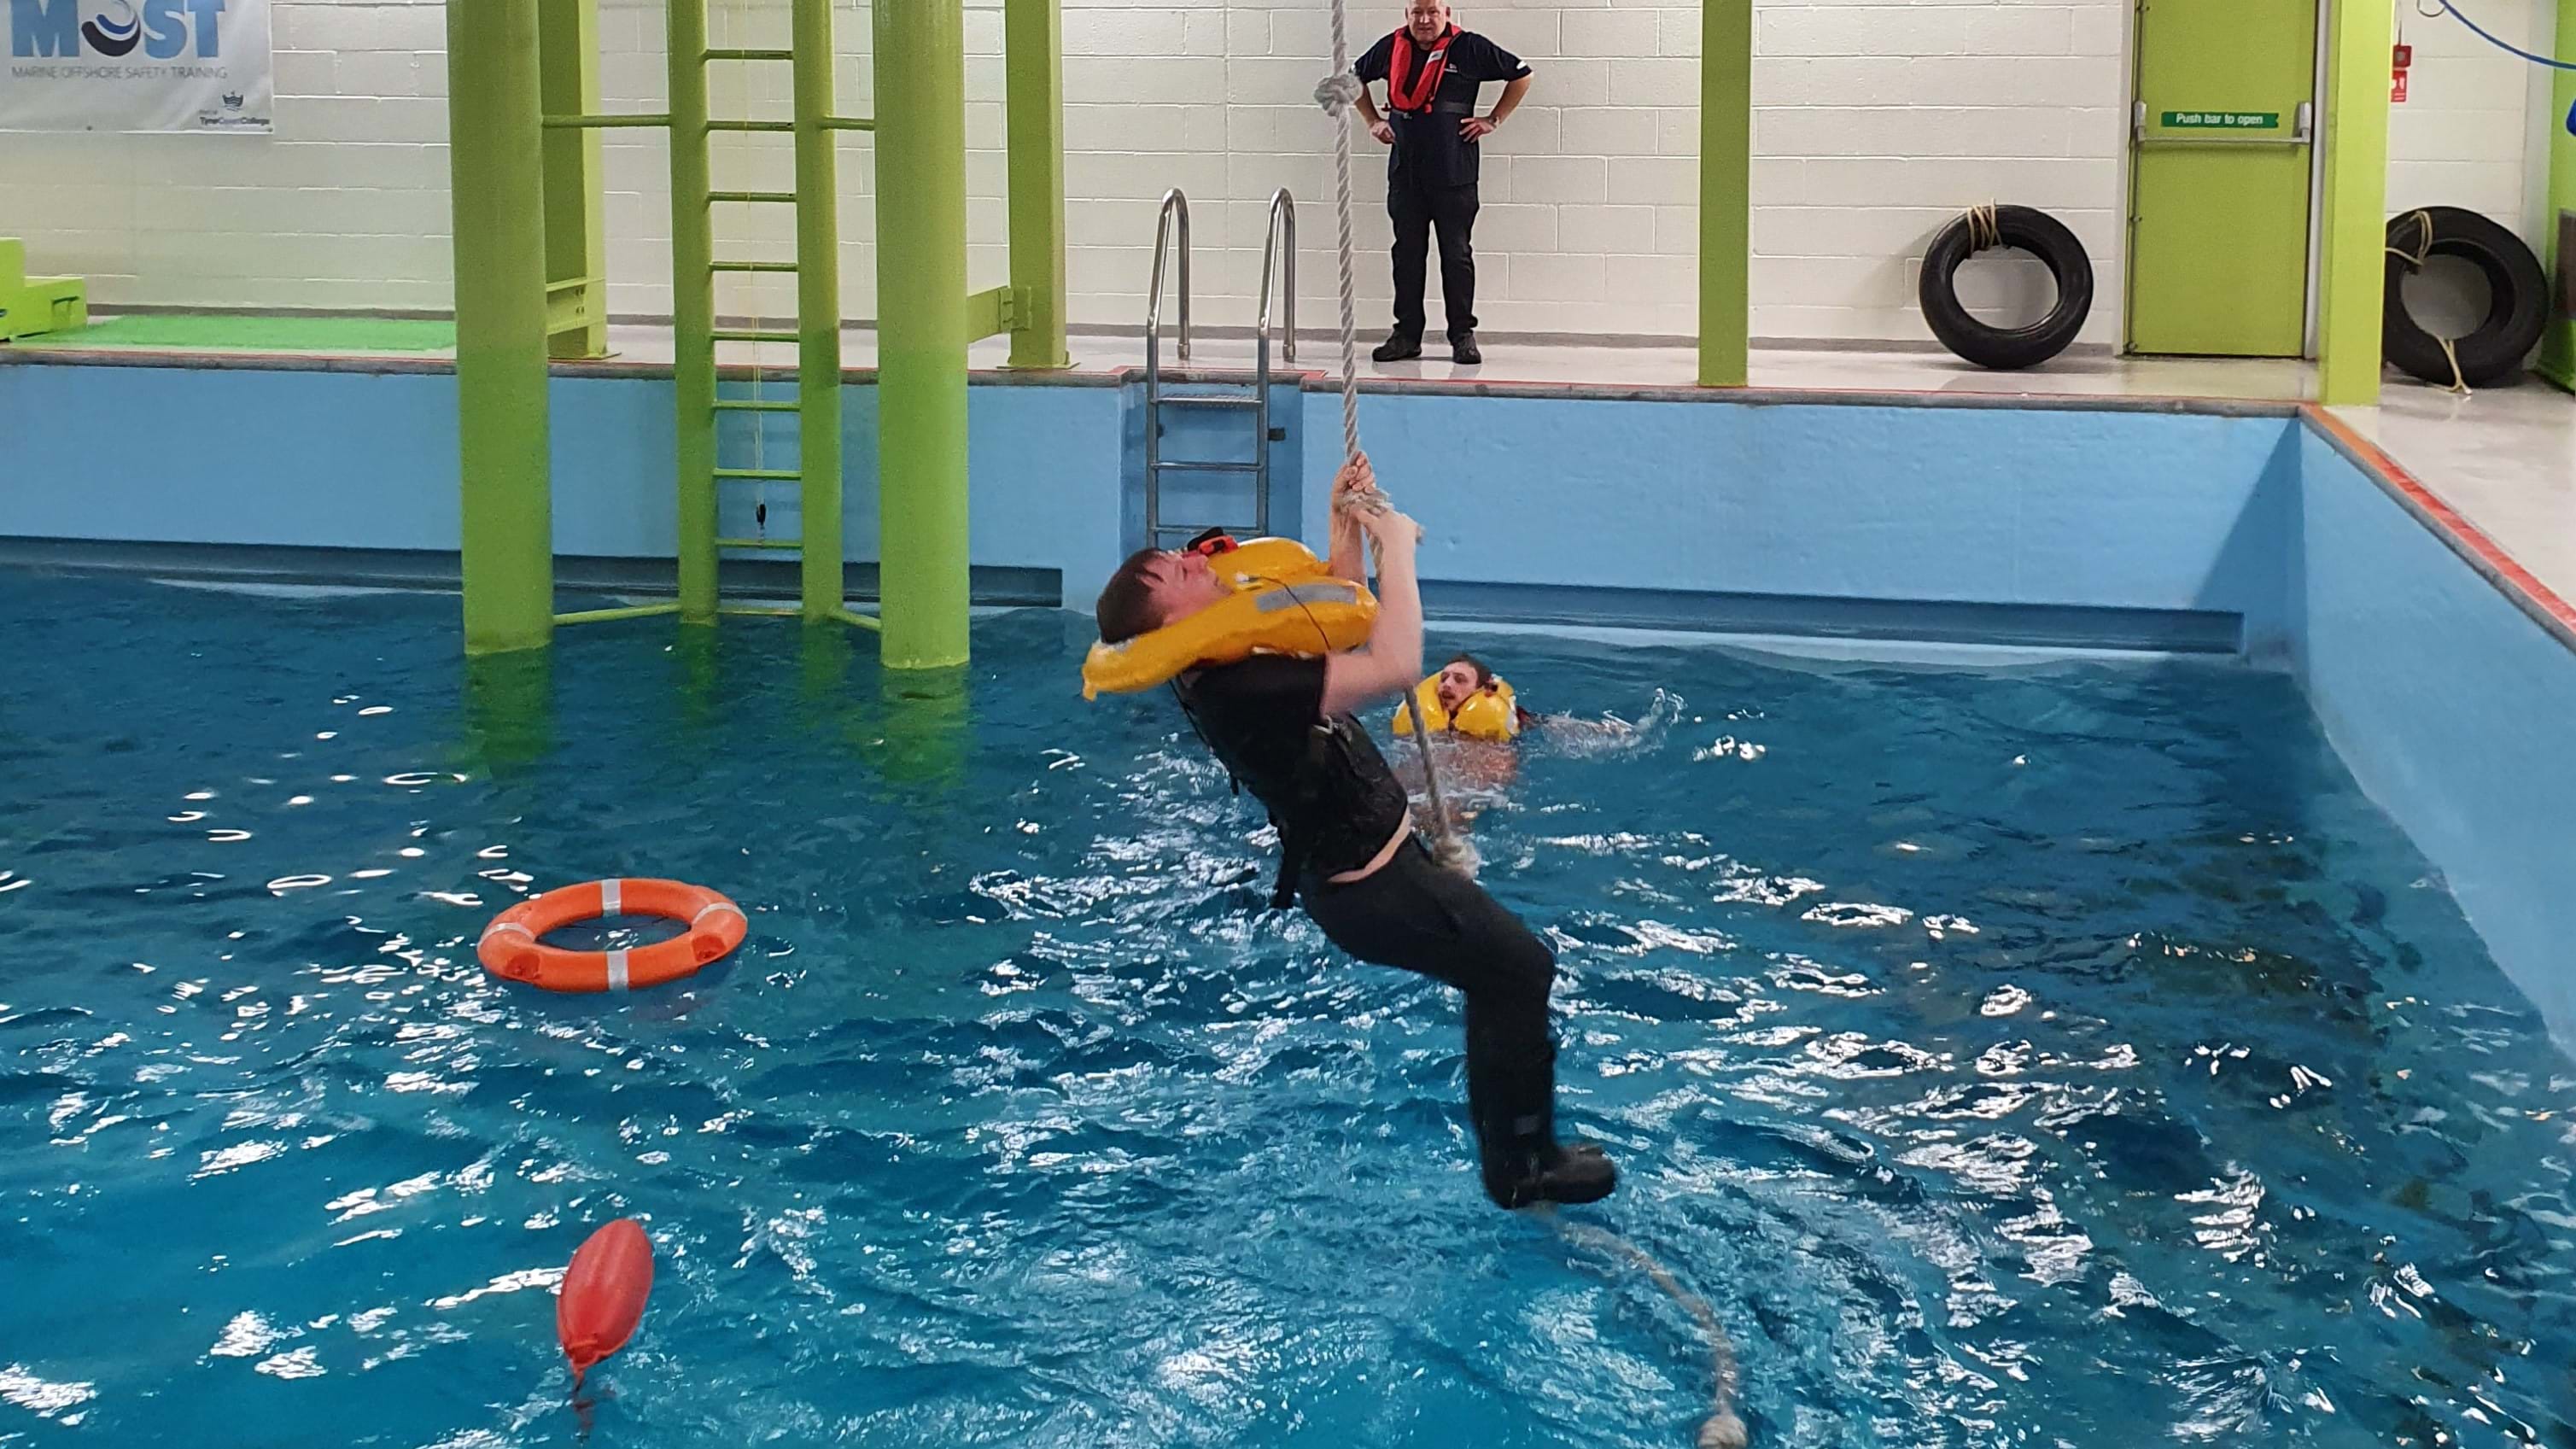 A man is in a training pool being lifted by a winch a rope to simulate a helicopter rescue.